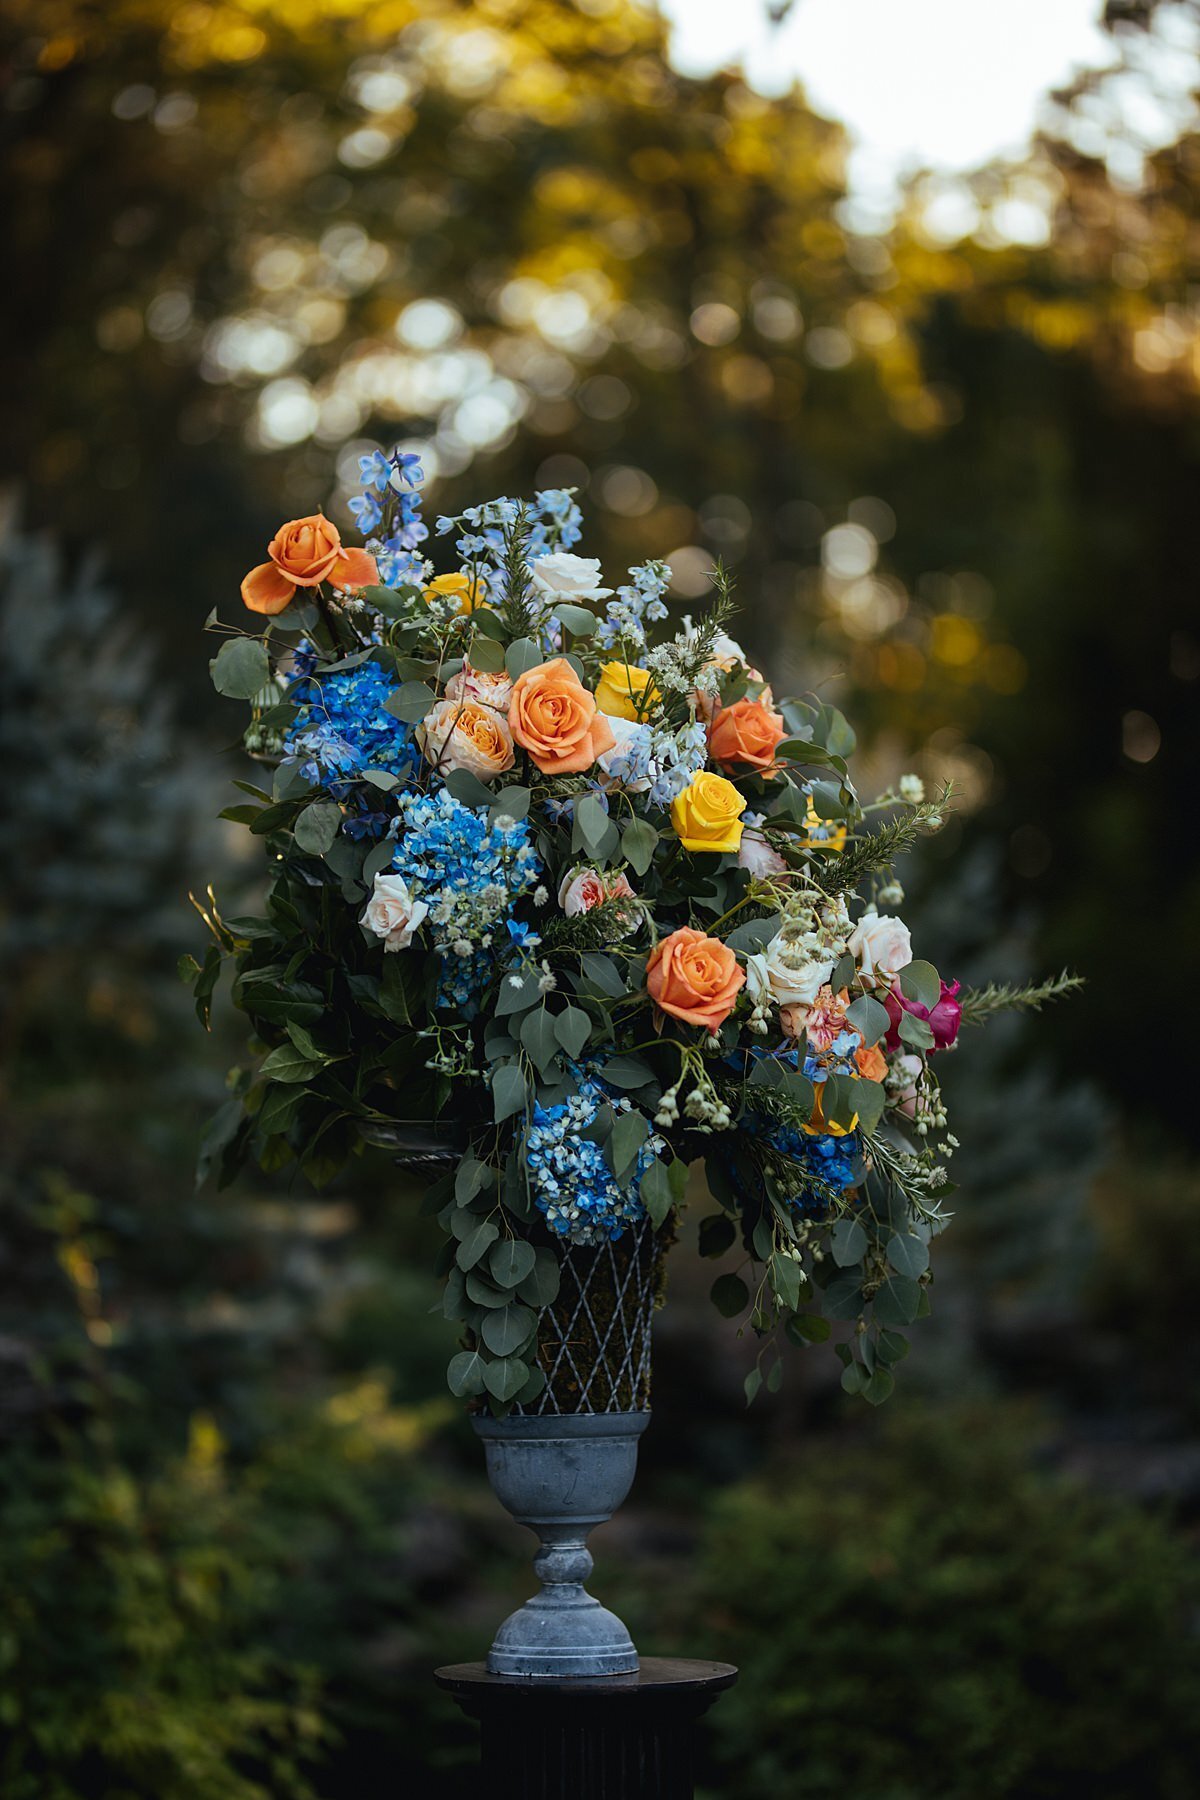 A large gray urn of flowers for a wedding ceremony at Cheekwood Botanical Gardens. The stone urn has blue, orange and ivory roses with an assortment of greenery and accents of hot pink flowers.